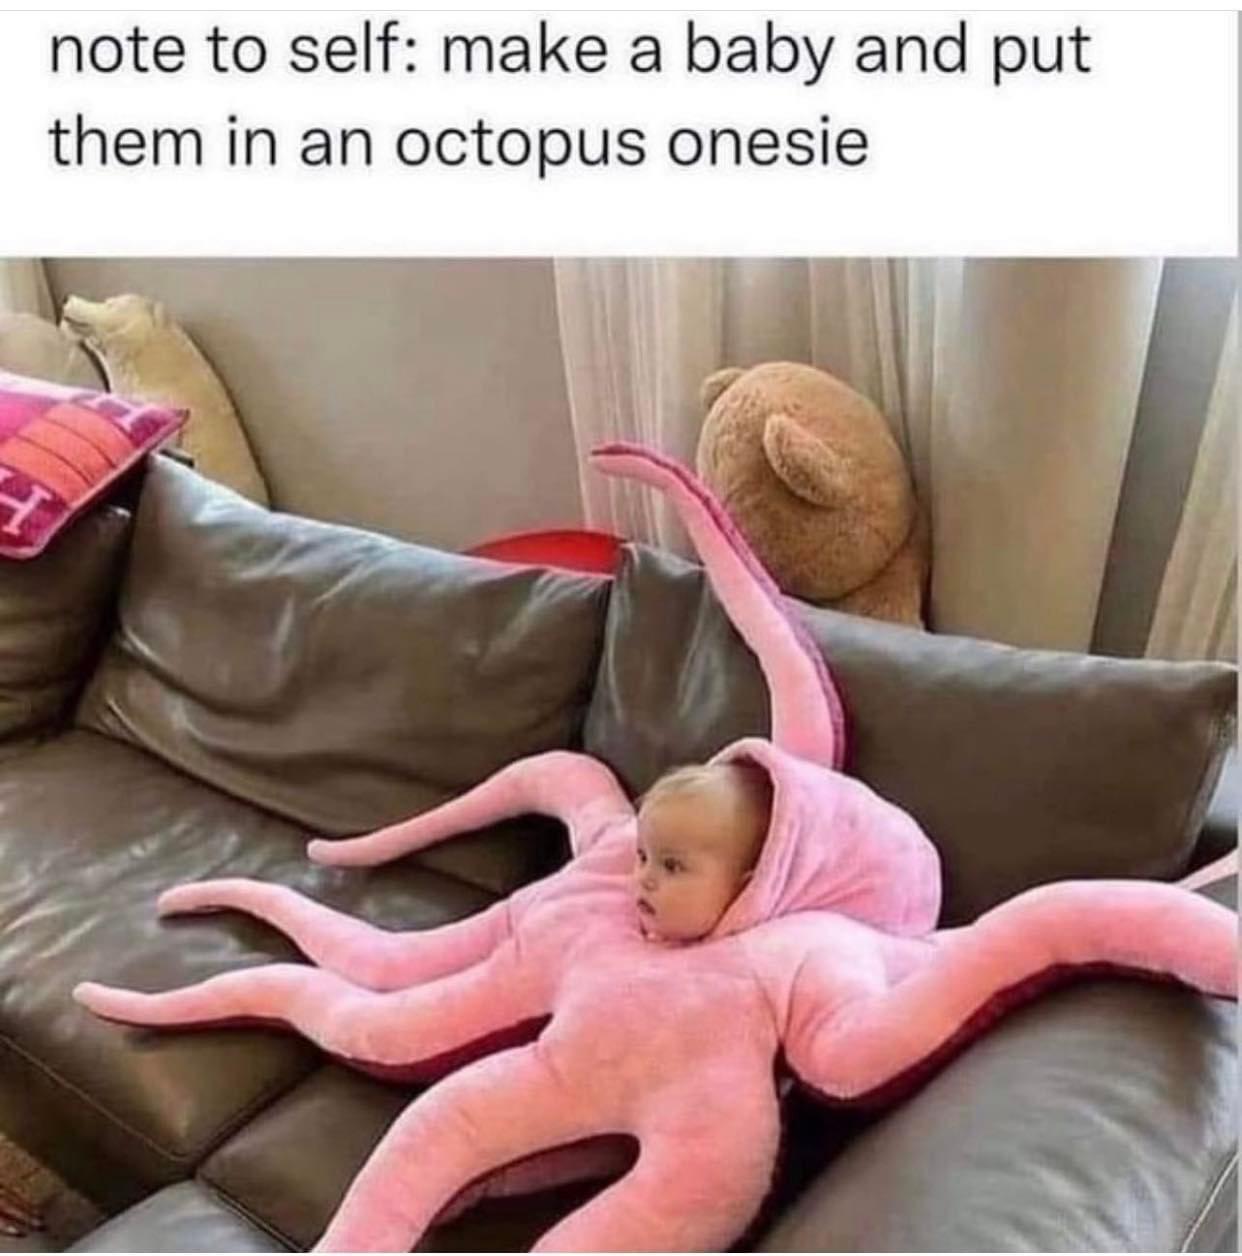 octo-baby